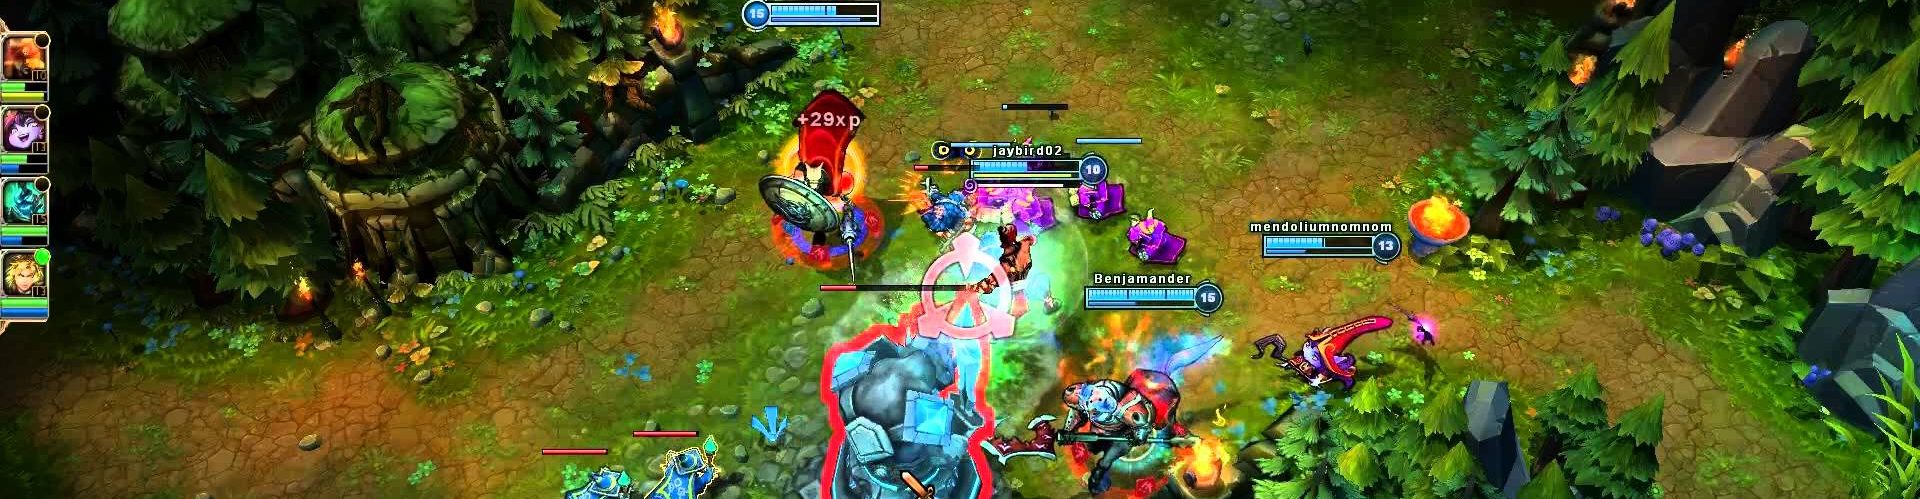 League-Of-Legends-Gameplay-2